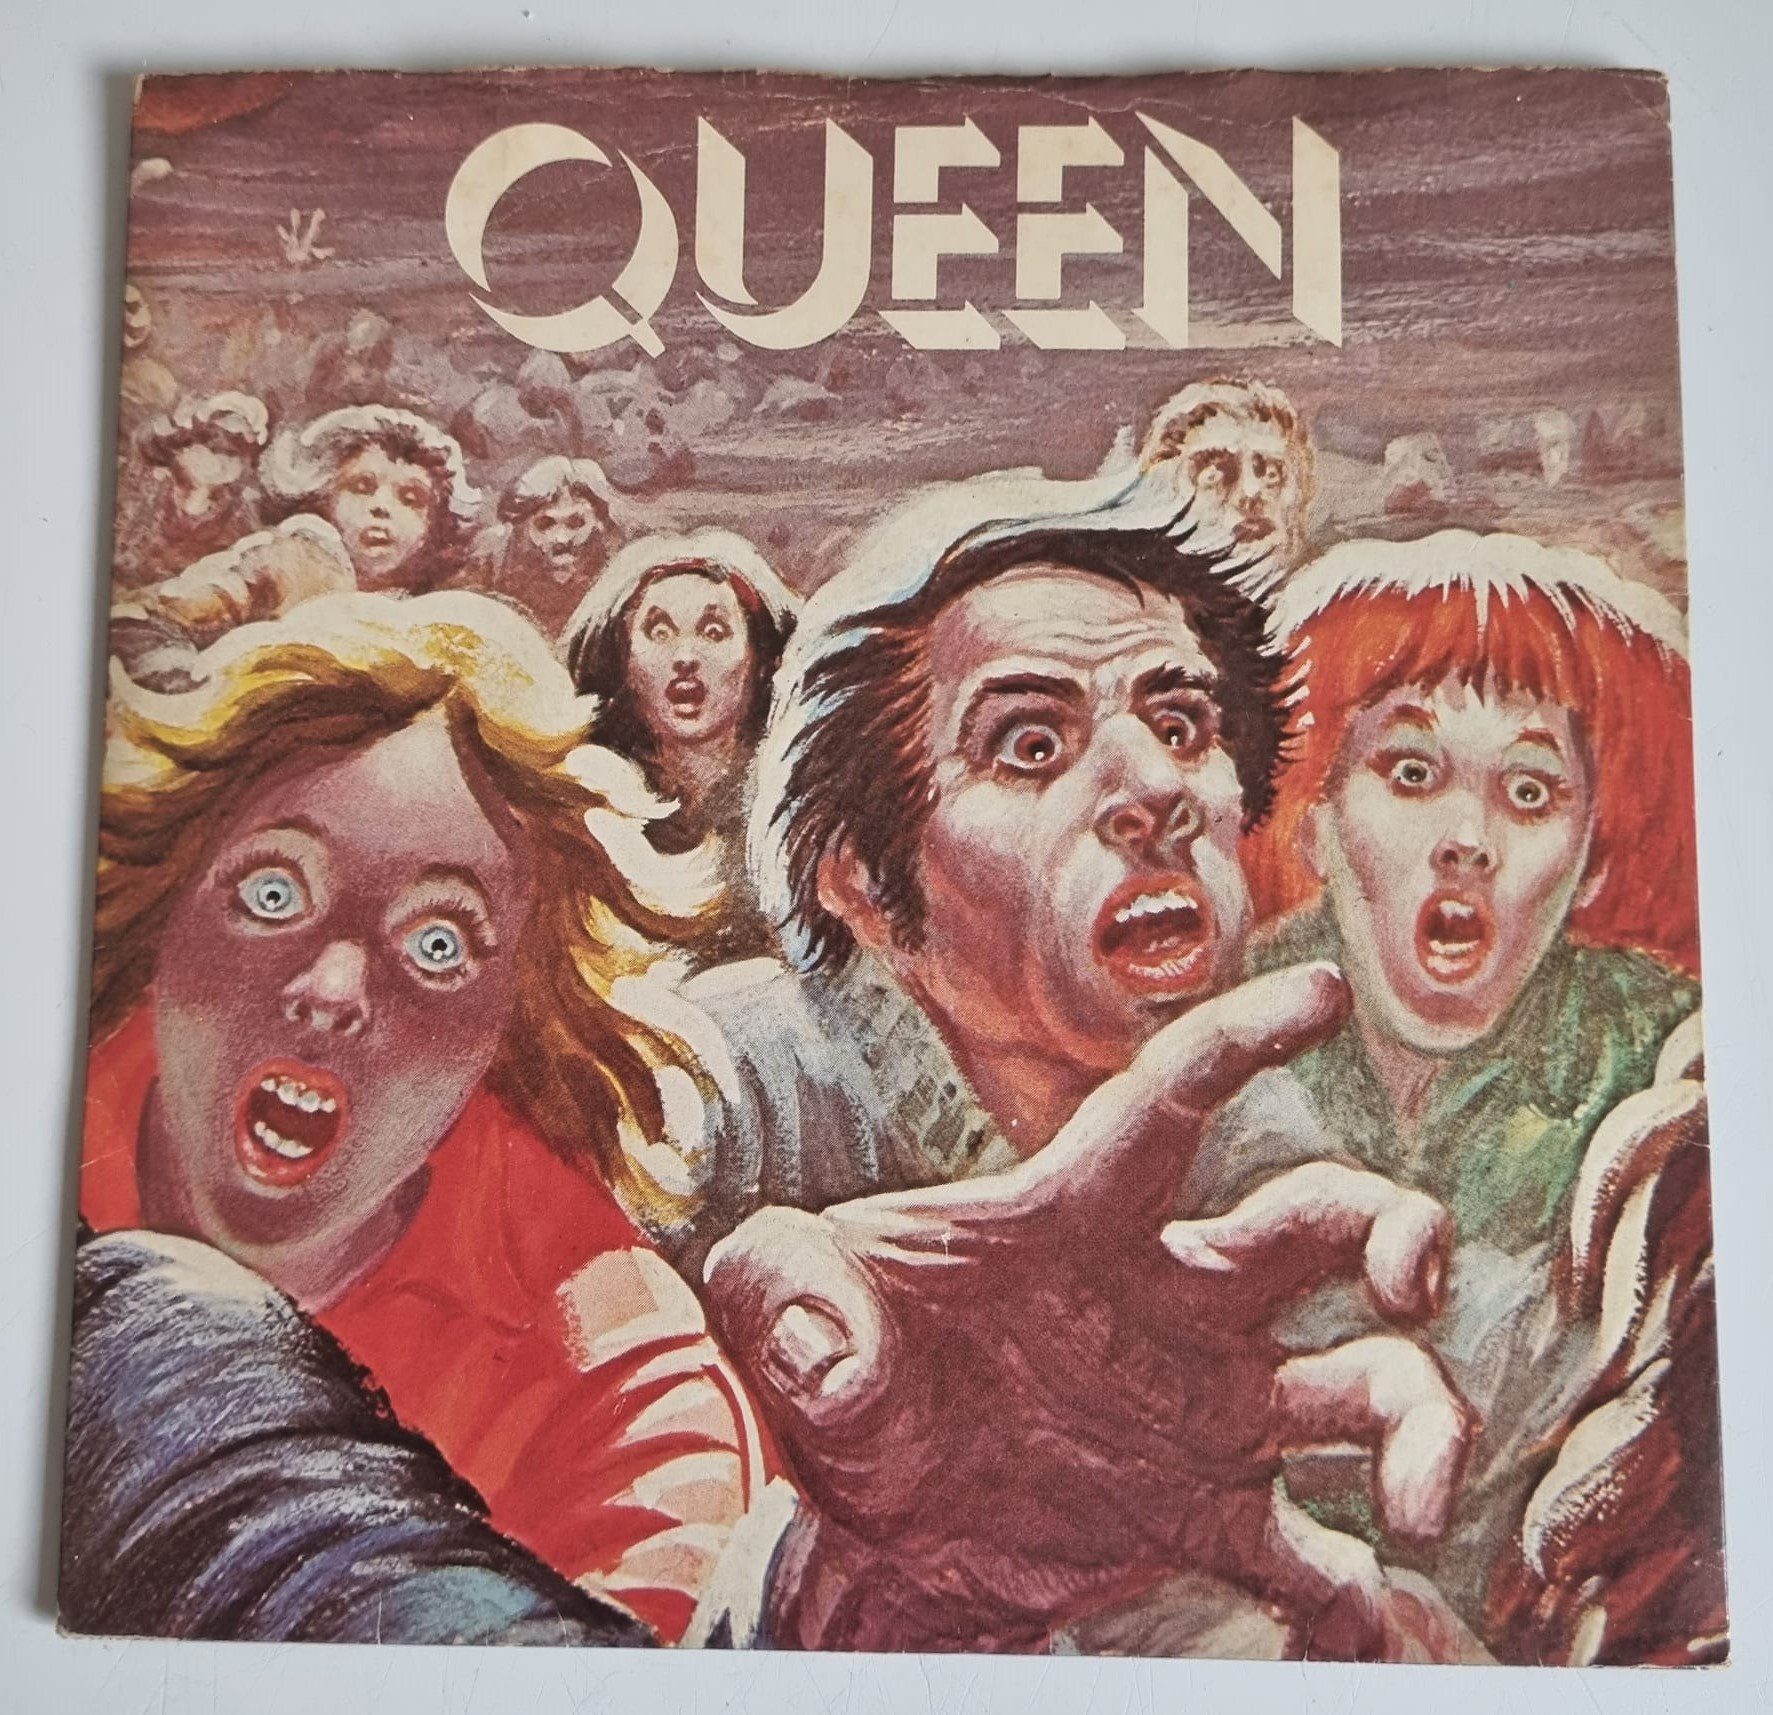 Buy this rare Queen record by clicking here